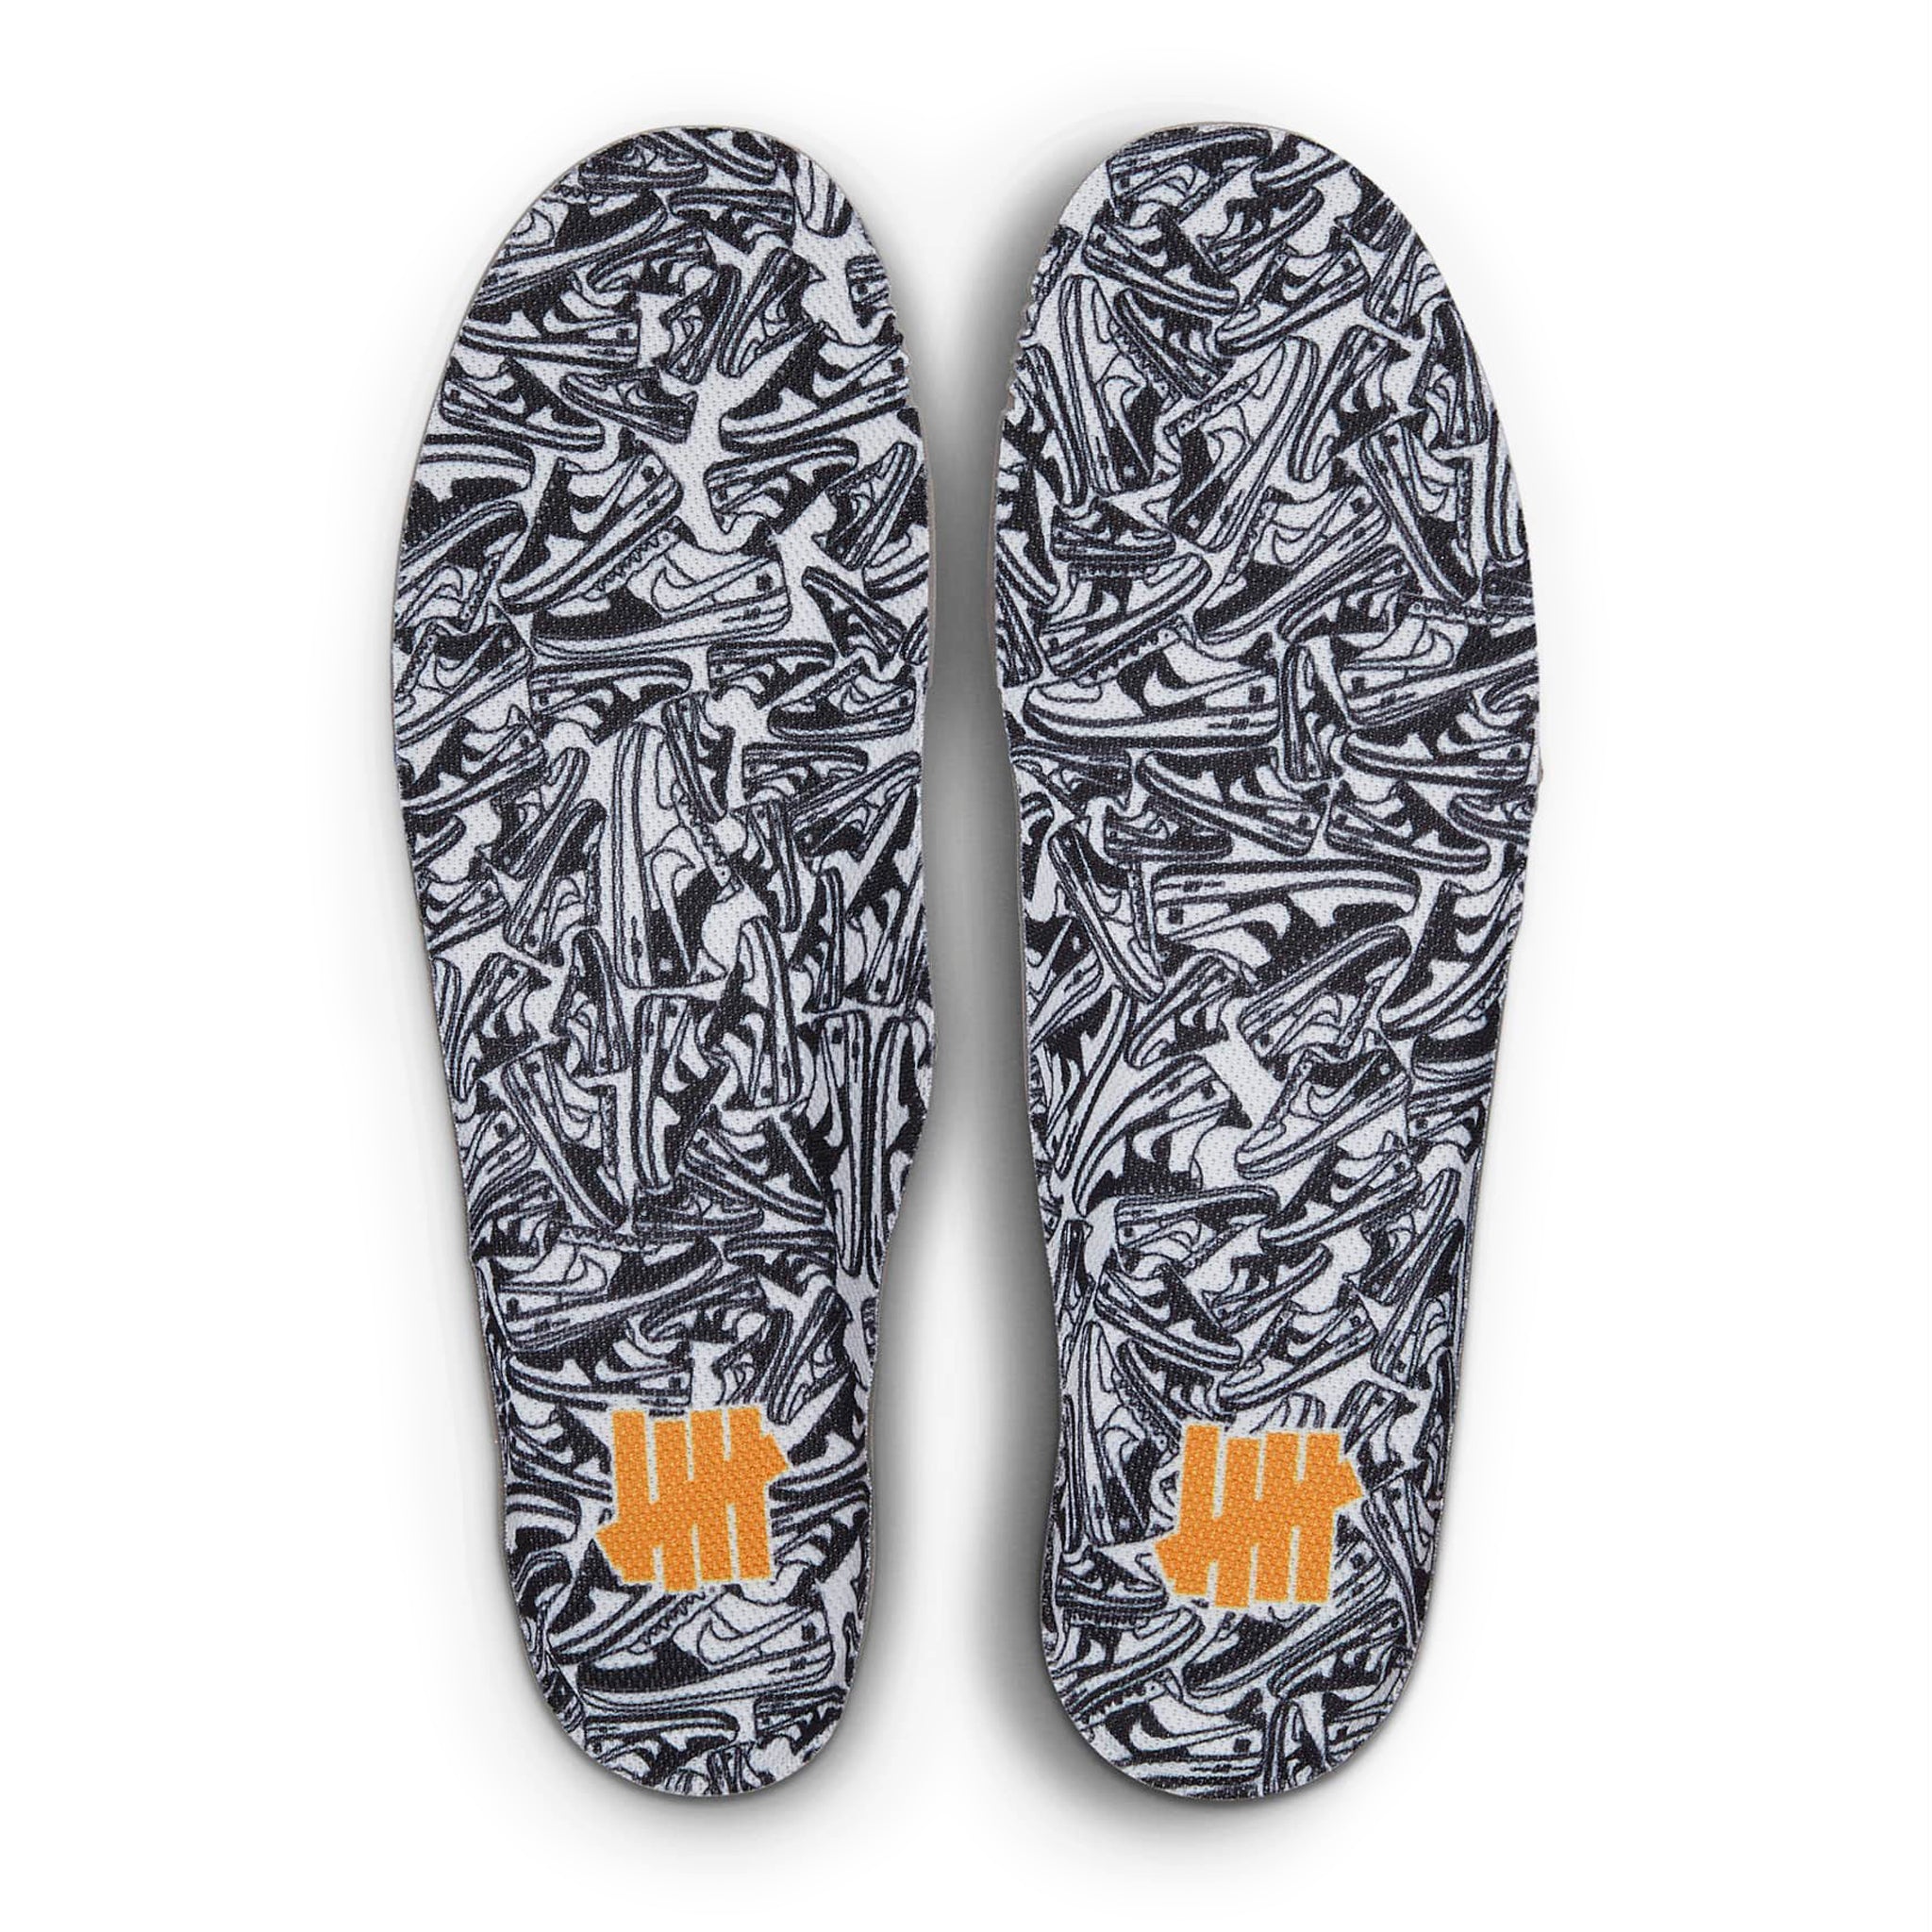 Insole view of Undefeated x Nike Air Force 1 Low Multi-Patent DV5255-400